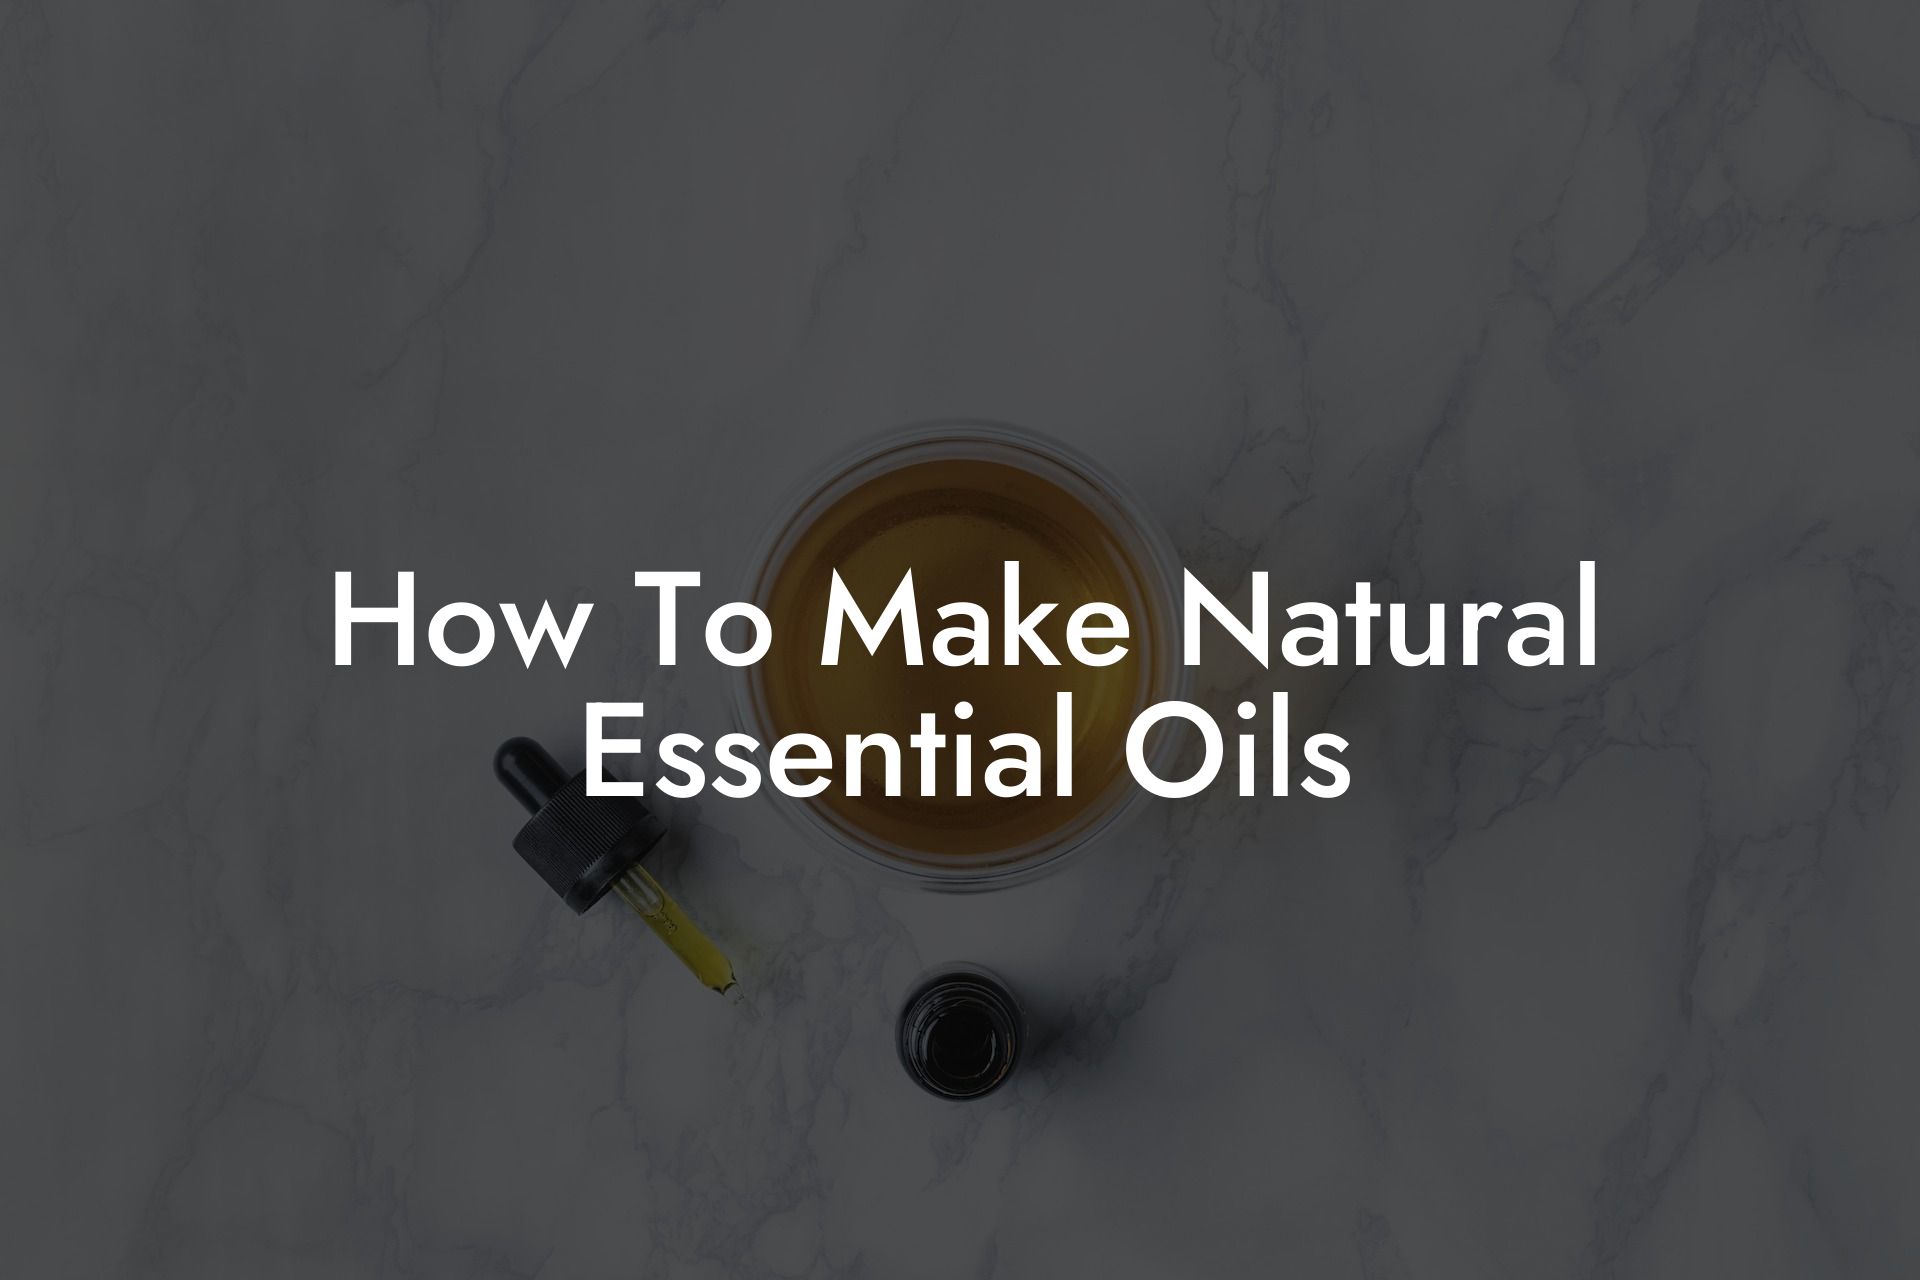 How To Make Natural Essential Oils